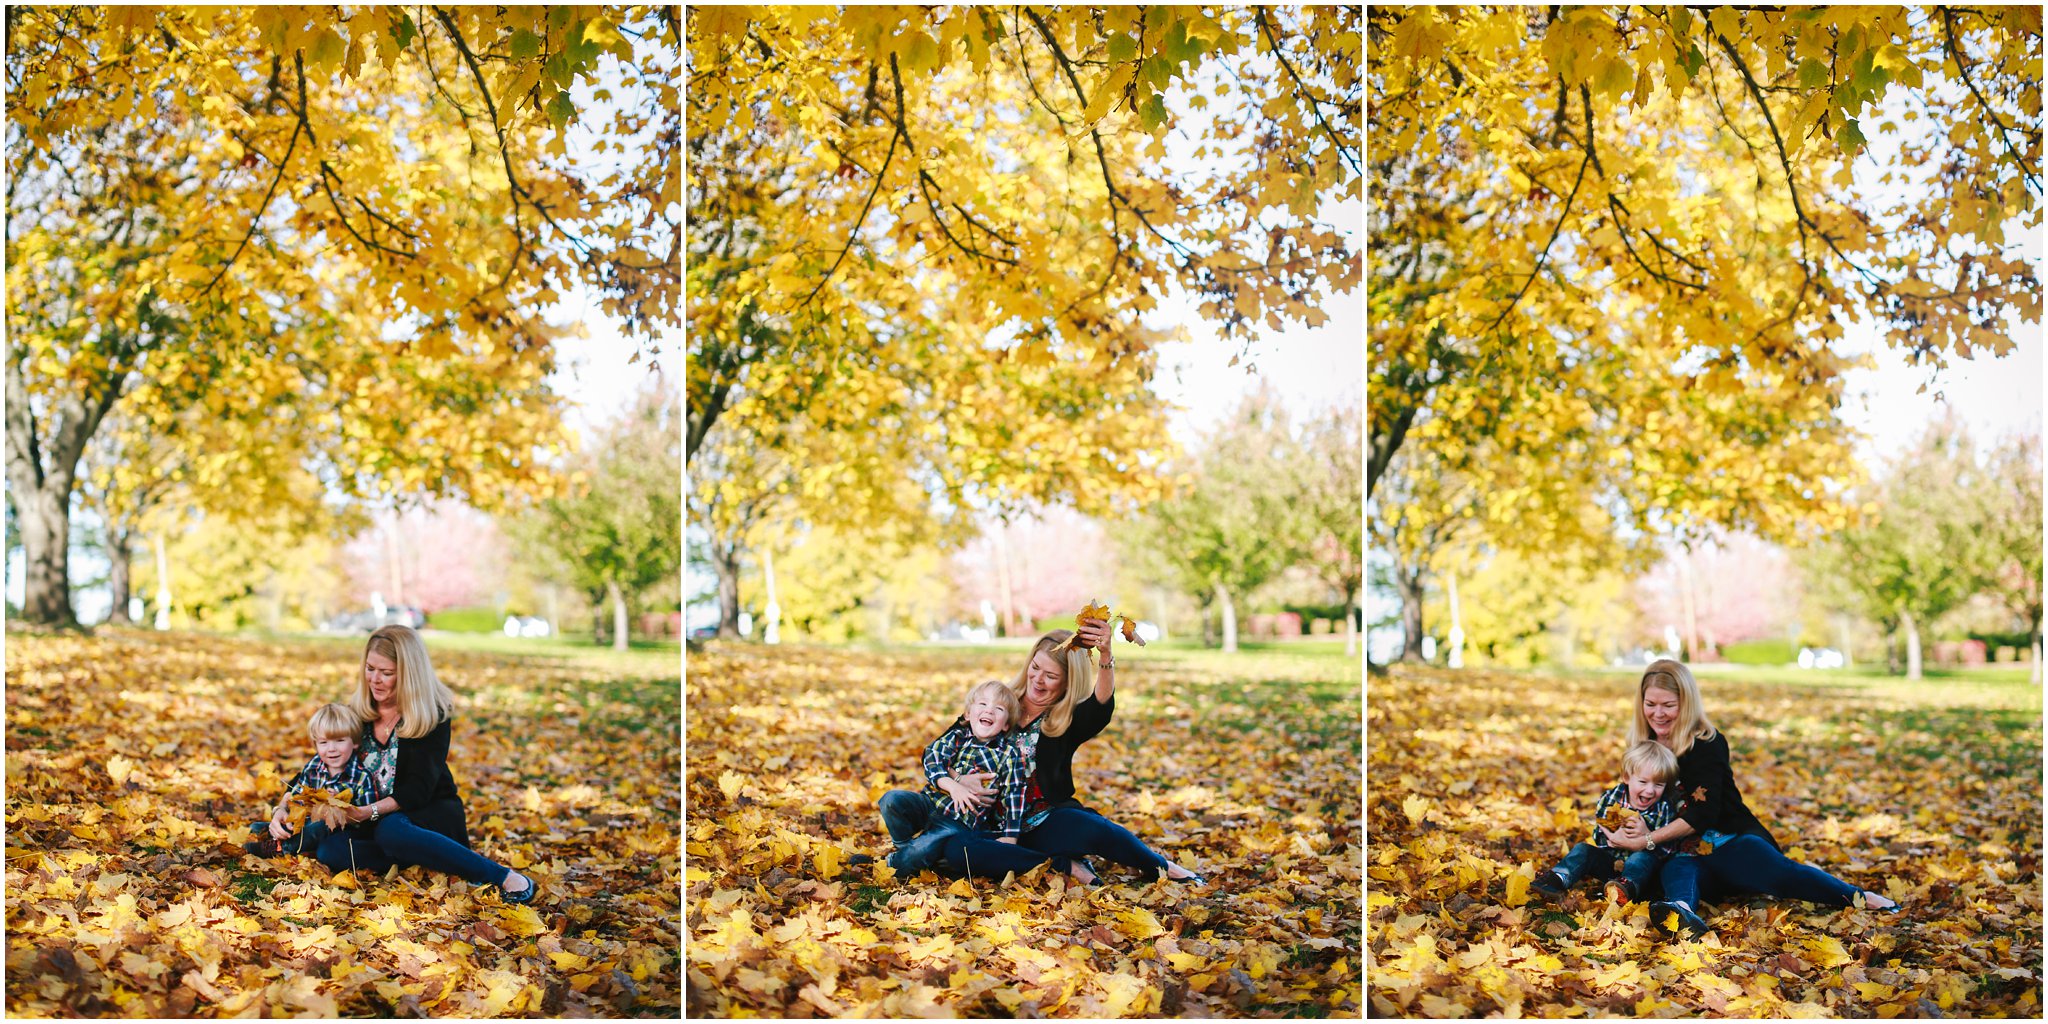 2016,3 year old,Boy,Brady,Fall,Family,Lauren Allen Photography,Mom,Oregon,Portland,Rara,Tree,candid,carefree,child,child photographer,childhood,grandma,kid,laugh,leaves,me,natural light,october,outdoors,outside,plaid,playing,preschooler,yellow,